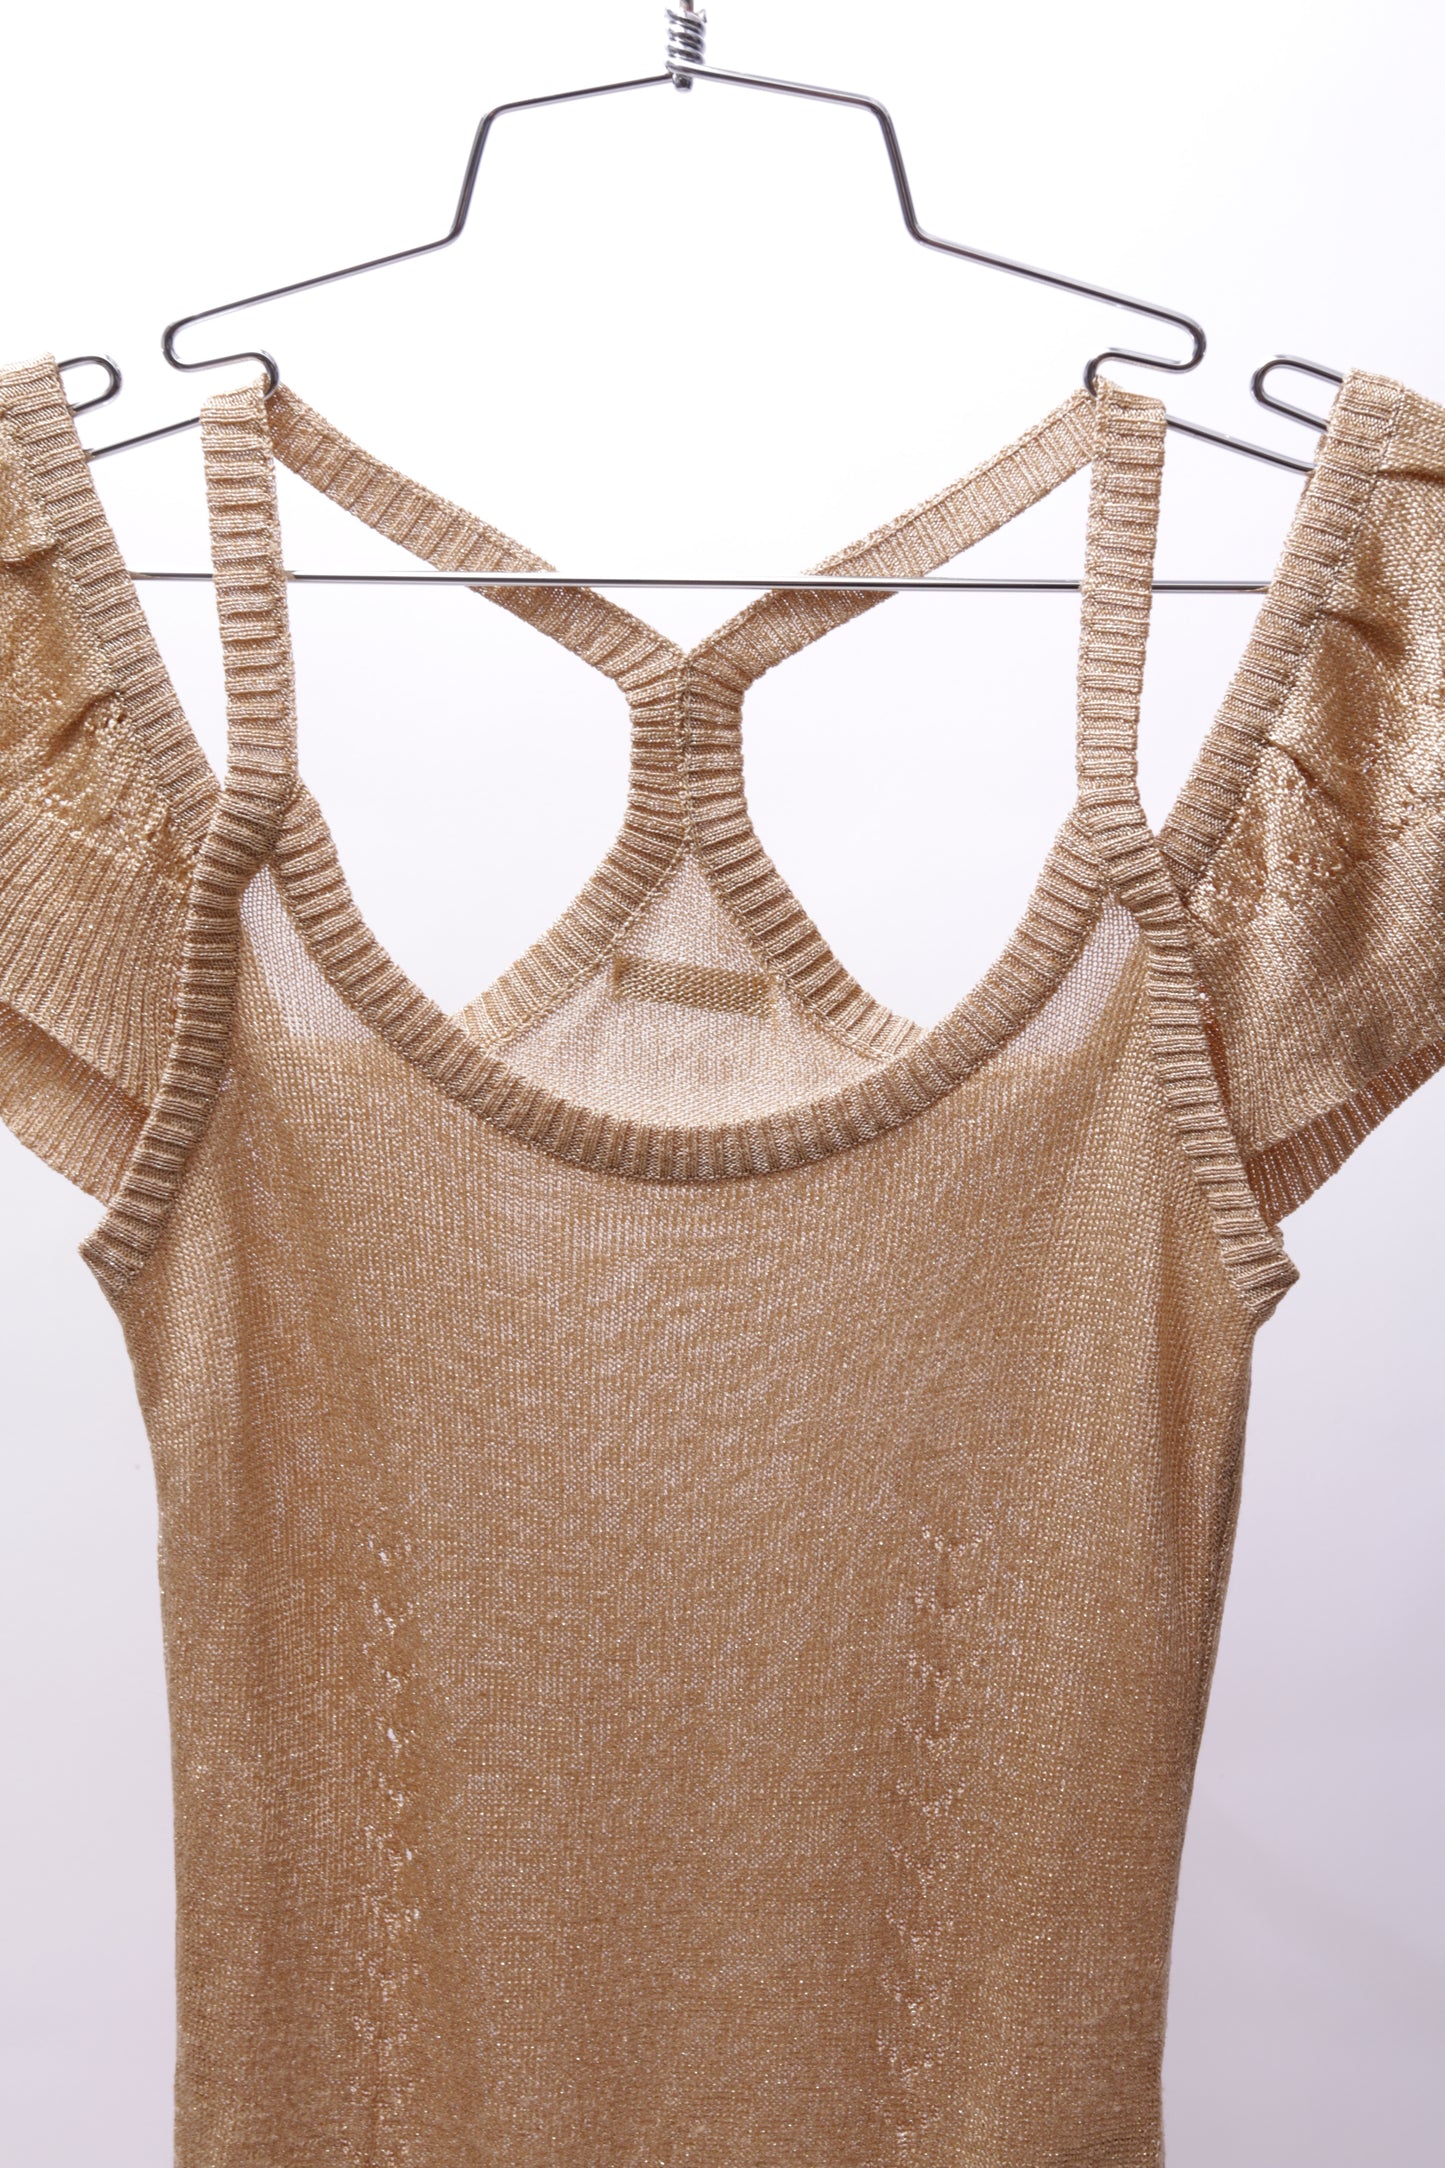 Dolce and Gabbana knitted top in gold and lurex